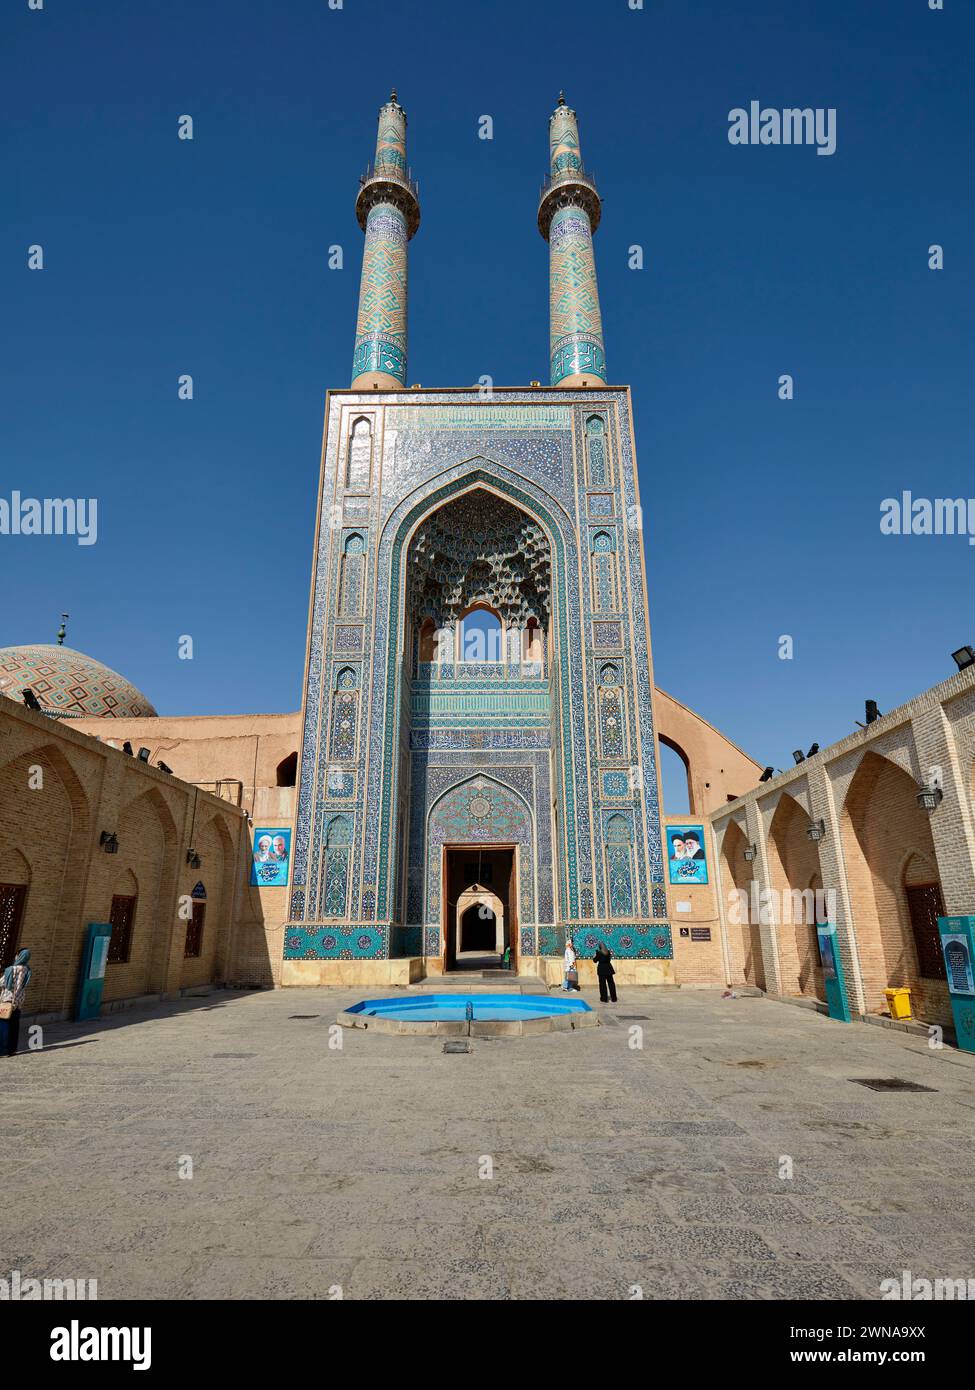 Two minarets of the Jameh Mosque of Yazd, 14th-century Azeri-style Shia mosque in the Old Town of Yazd, Iran. Stock Photo